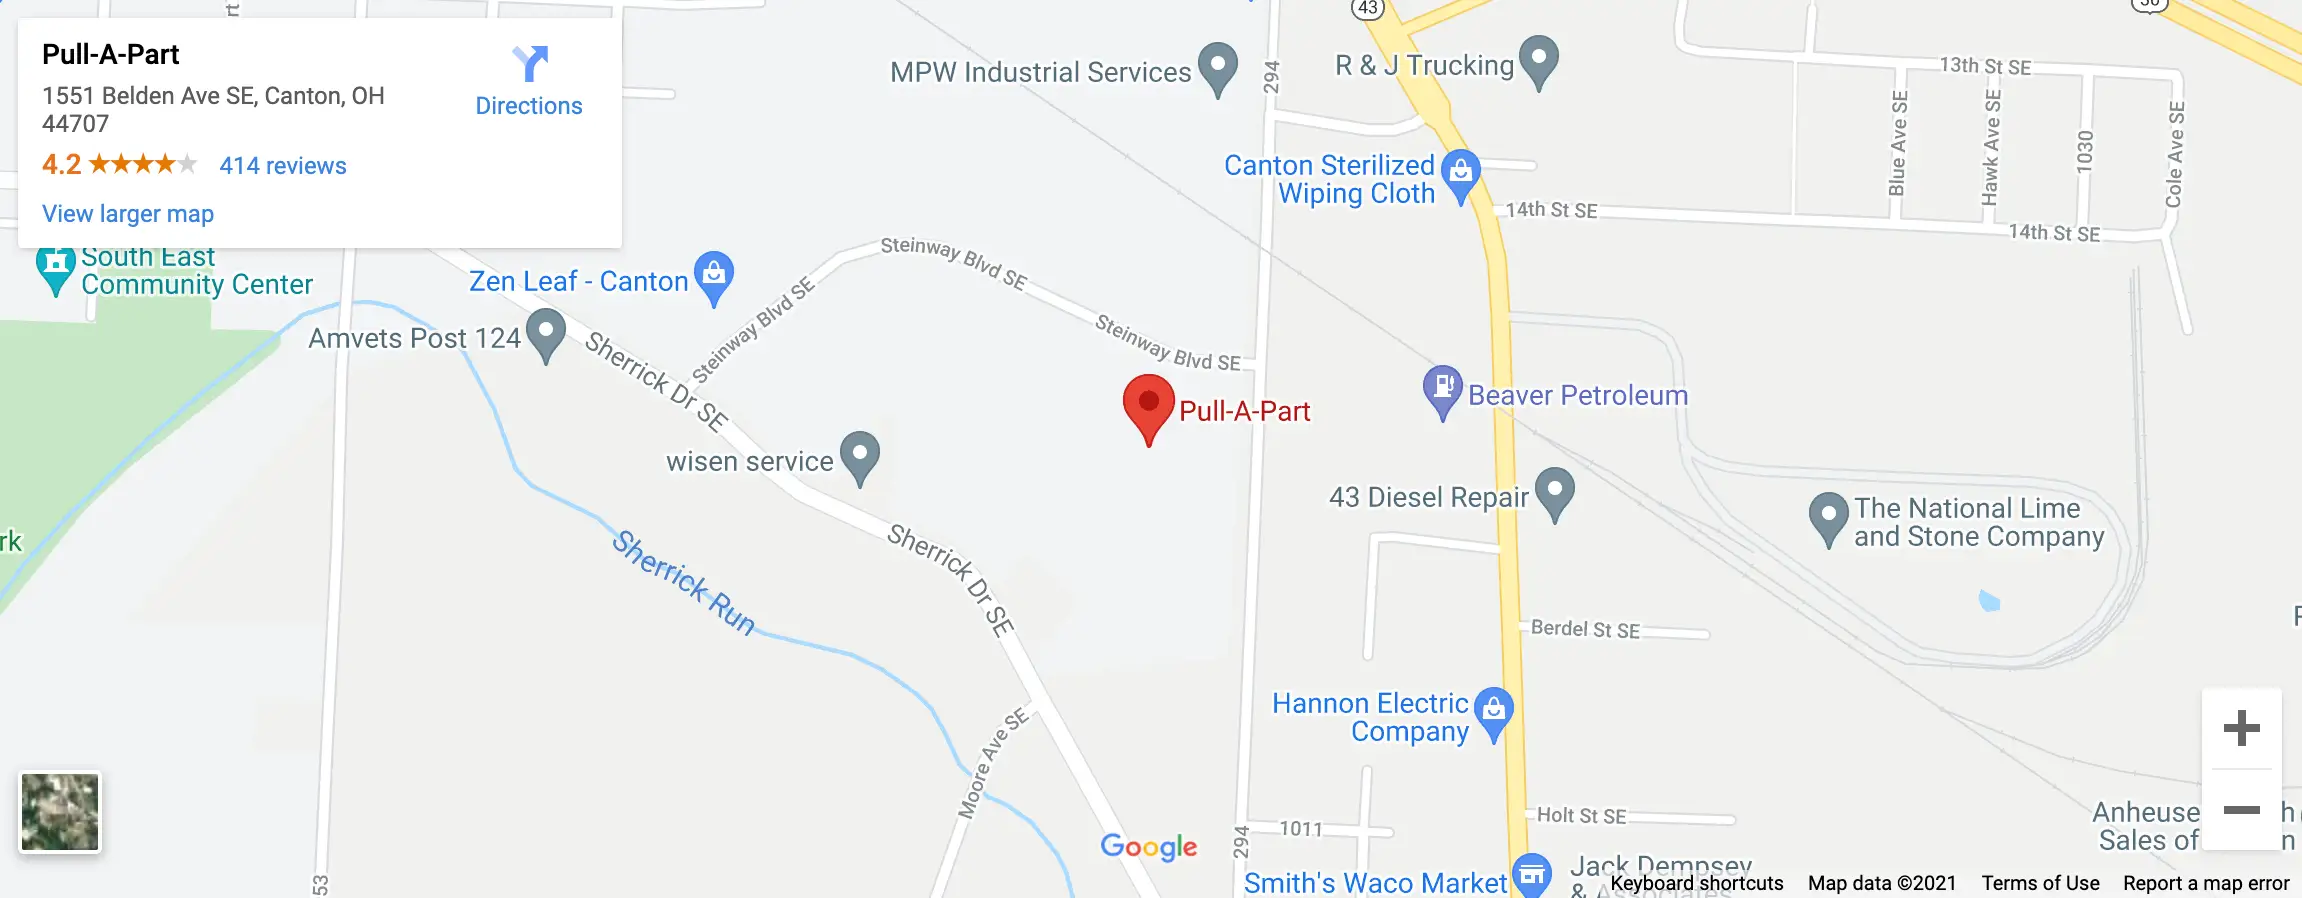 Get Directions to Pull-A-Part Canton